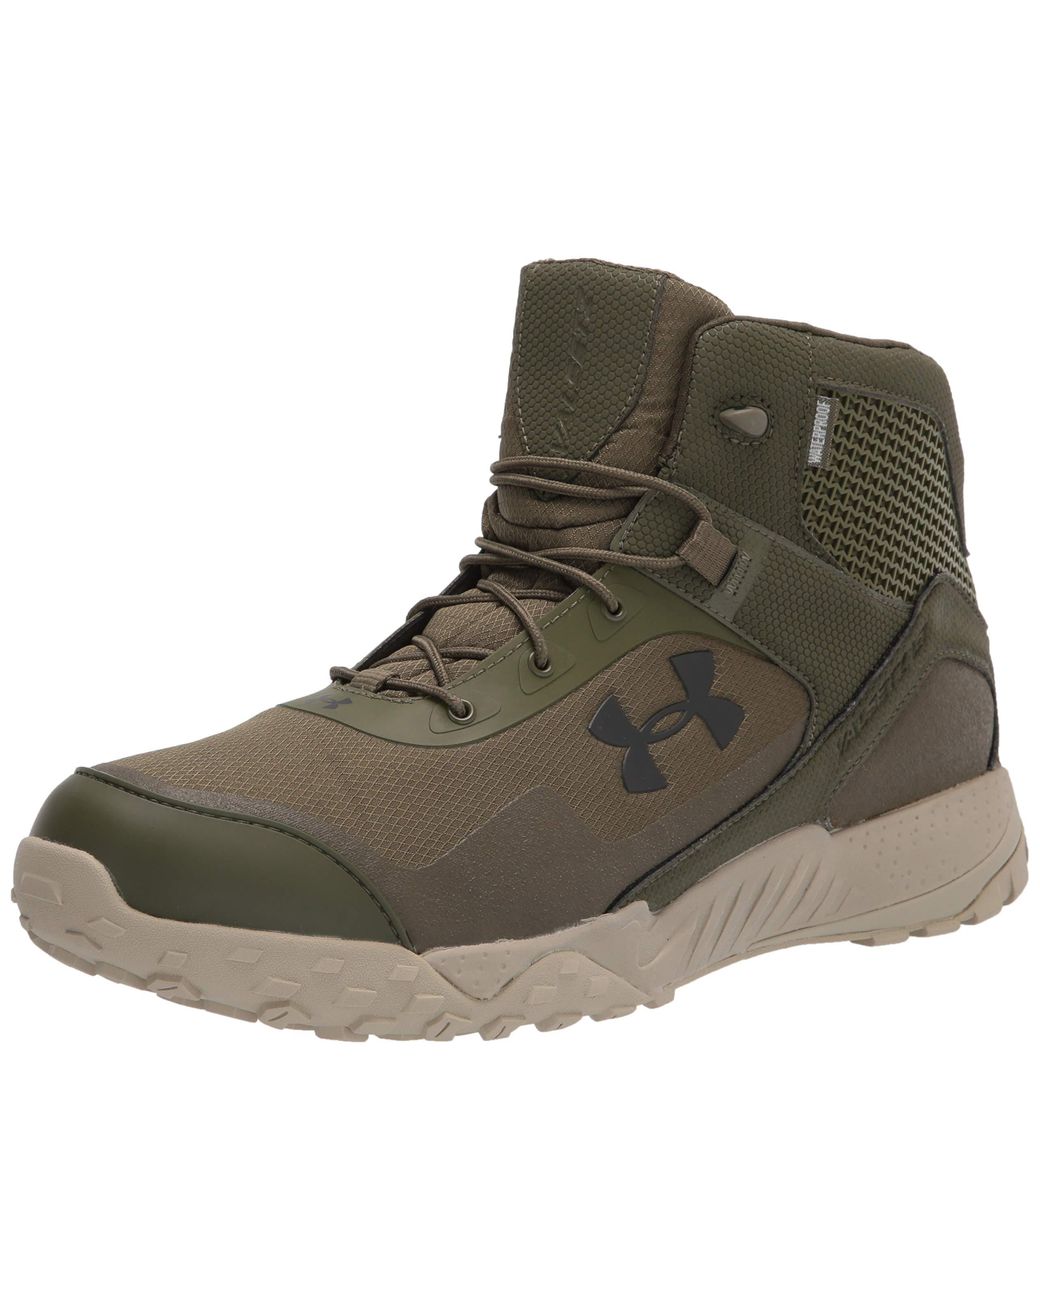 Under Armour Valsetz RTS 1.5 Tactical Boots - Lightweight and Durable